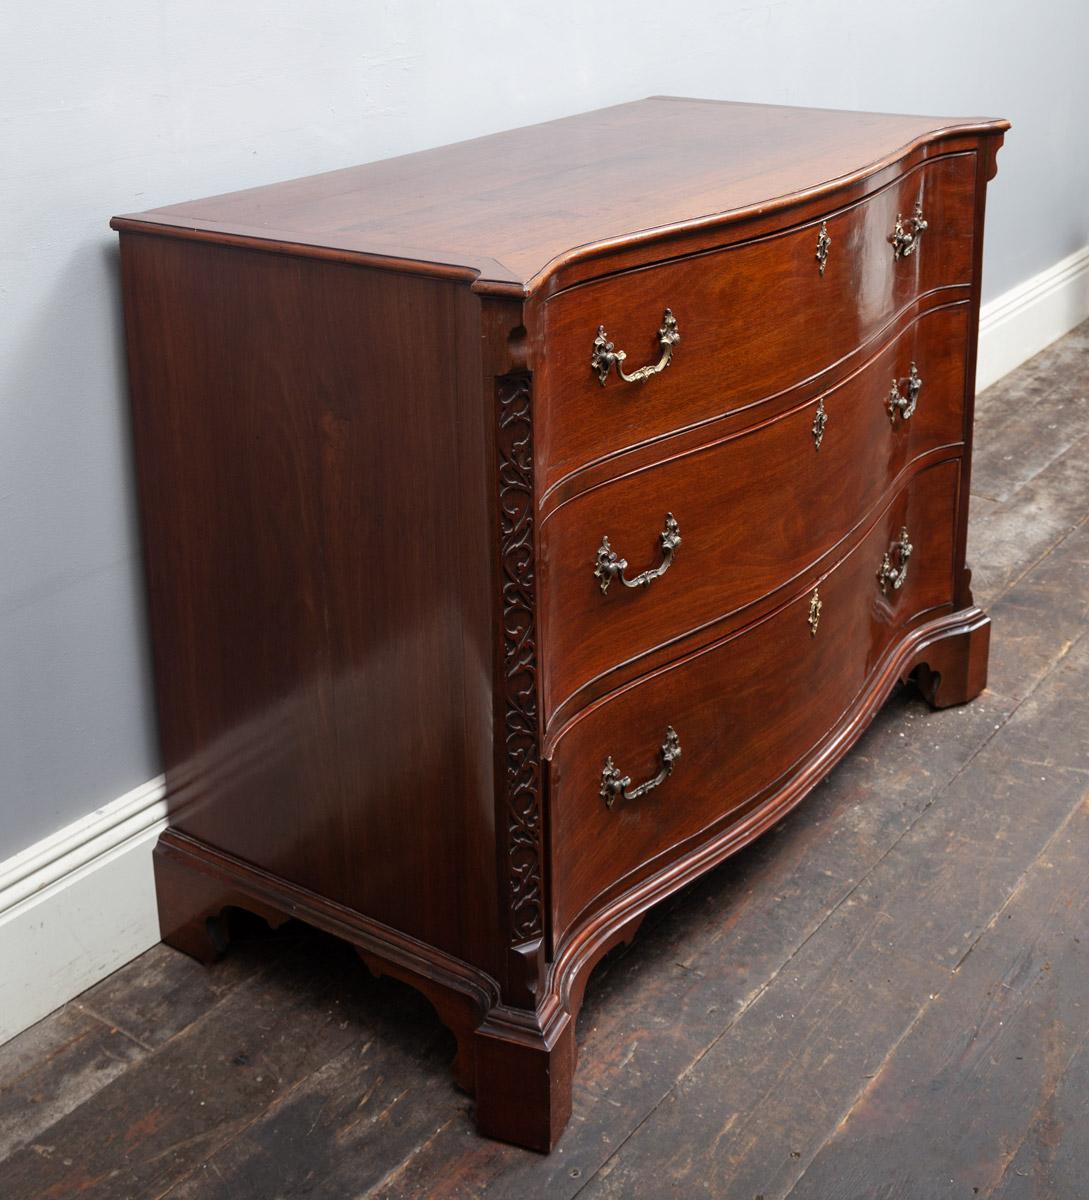 A very fine 18th century mahogany serpentine chest of drawers in the manner of Thomas Chippendale. The beautifully figured and patinated serpentine moulded top, with canted corners above three serpentine drawers, each with gilded Rococo handles and